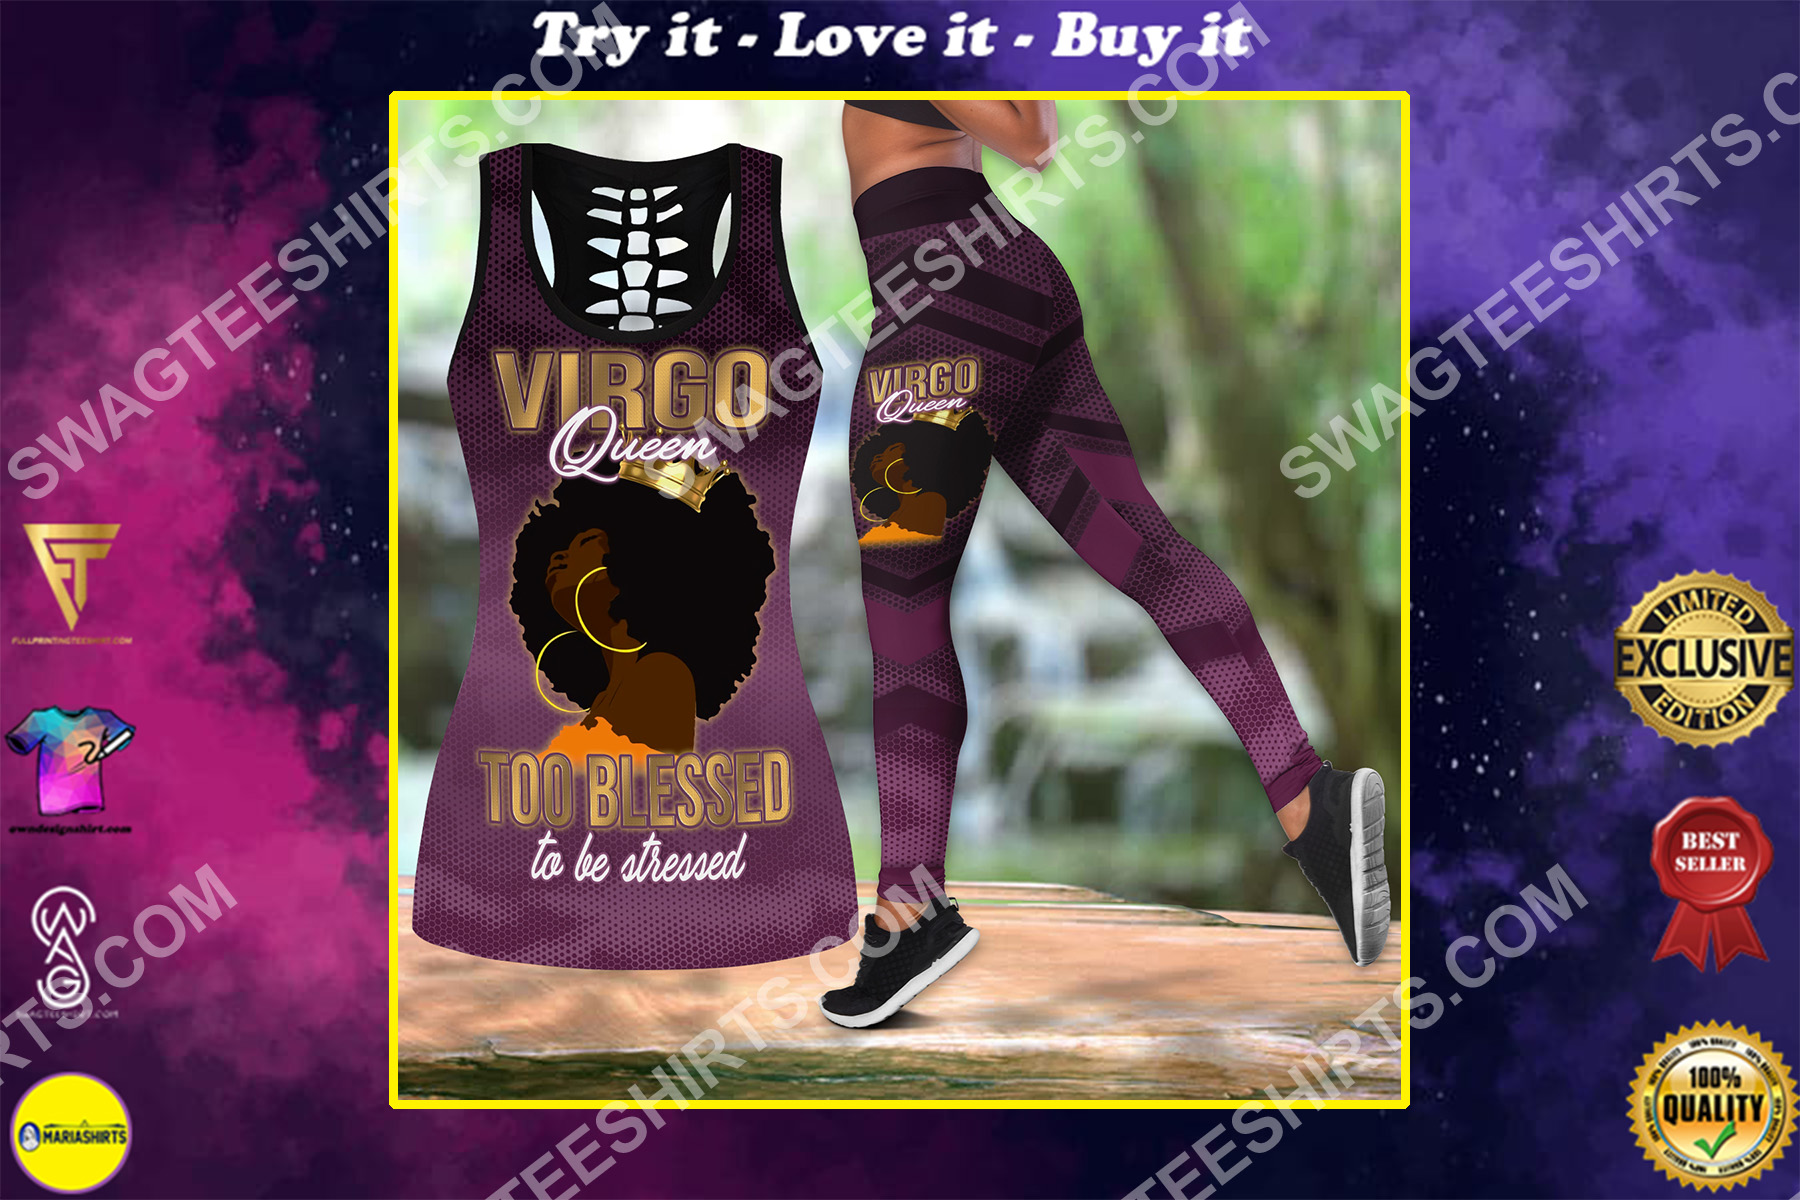 virgo queen too blessed to be stressed birthday gift set sports outfit